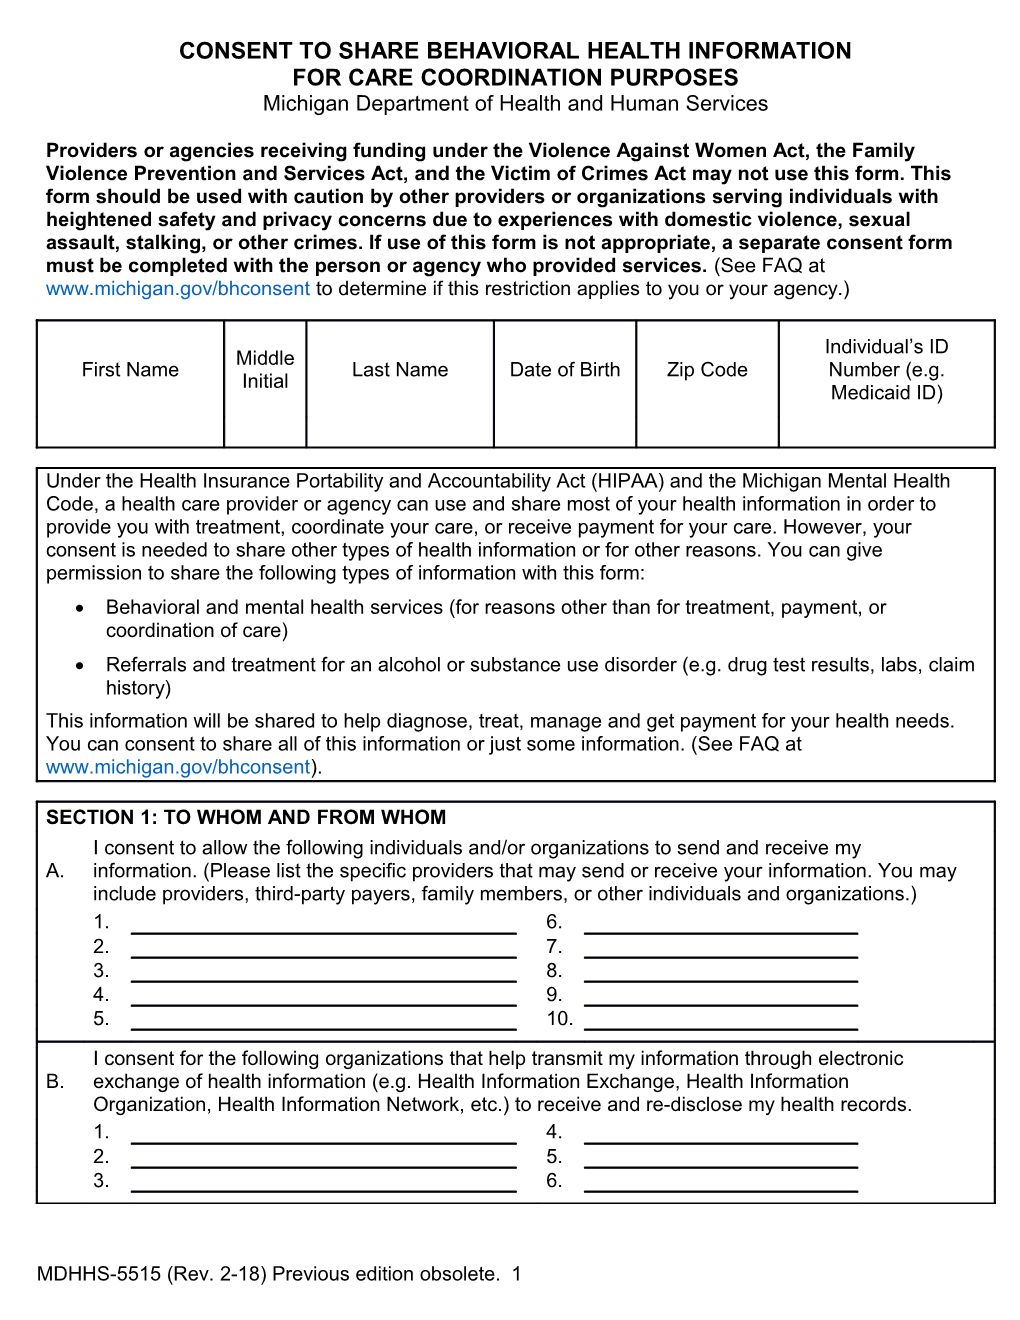 Consent to Share Behavioral Health Information for Care Coordination Purposes Form, MDHHS-5515